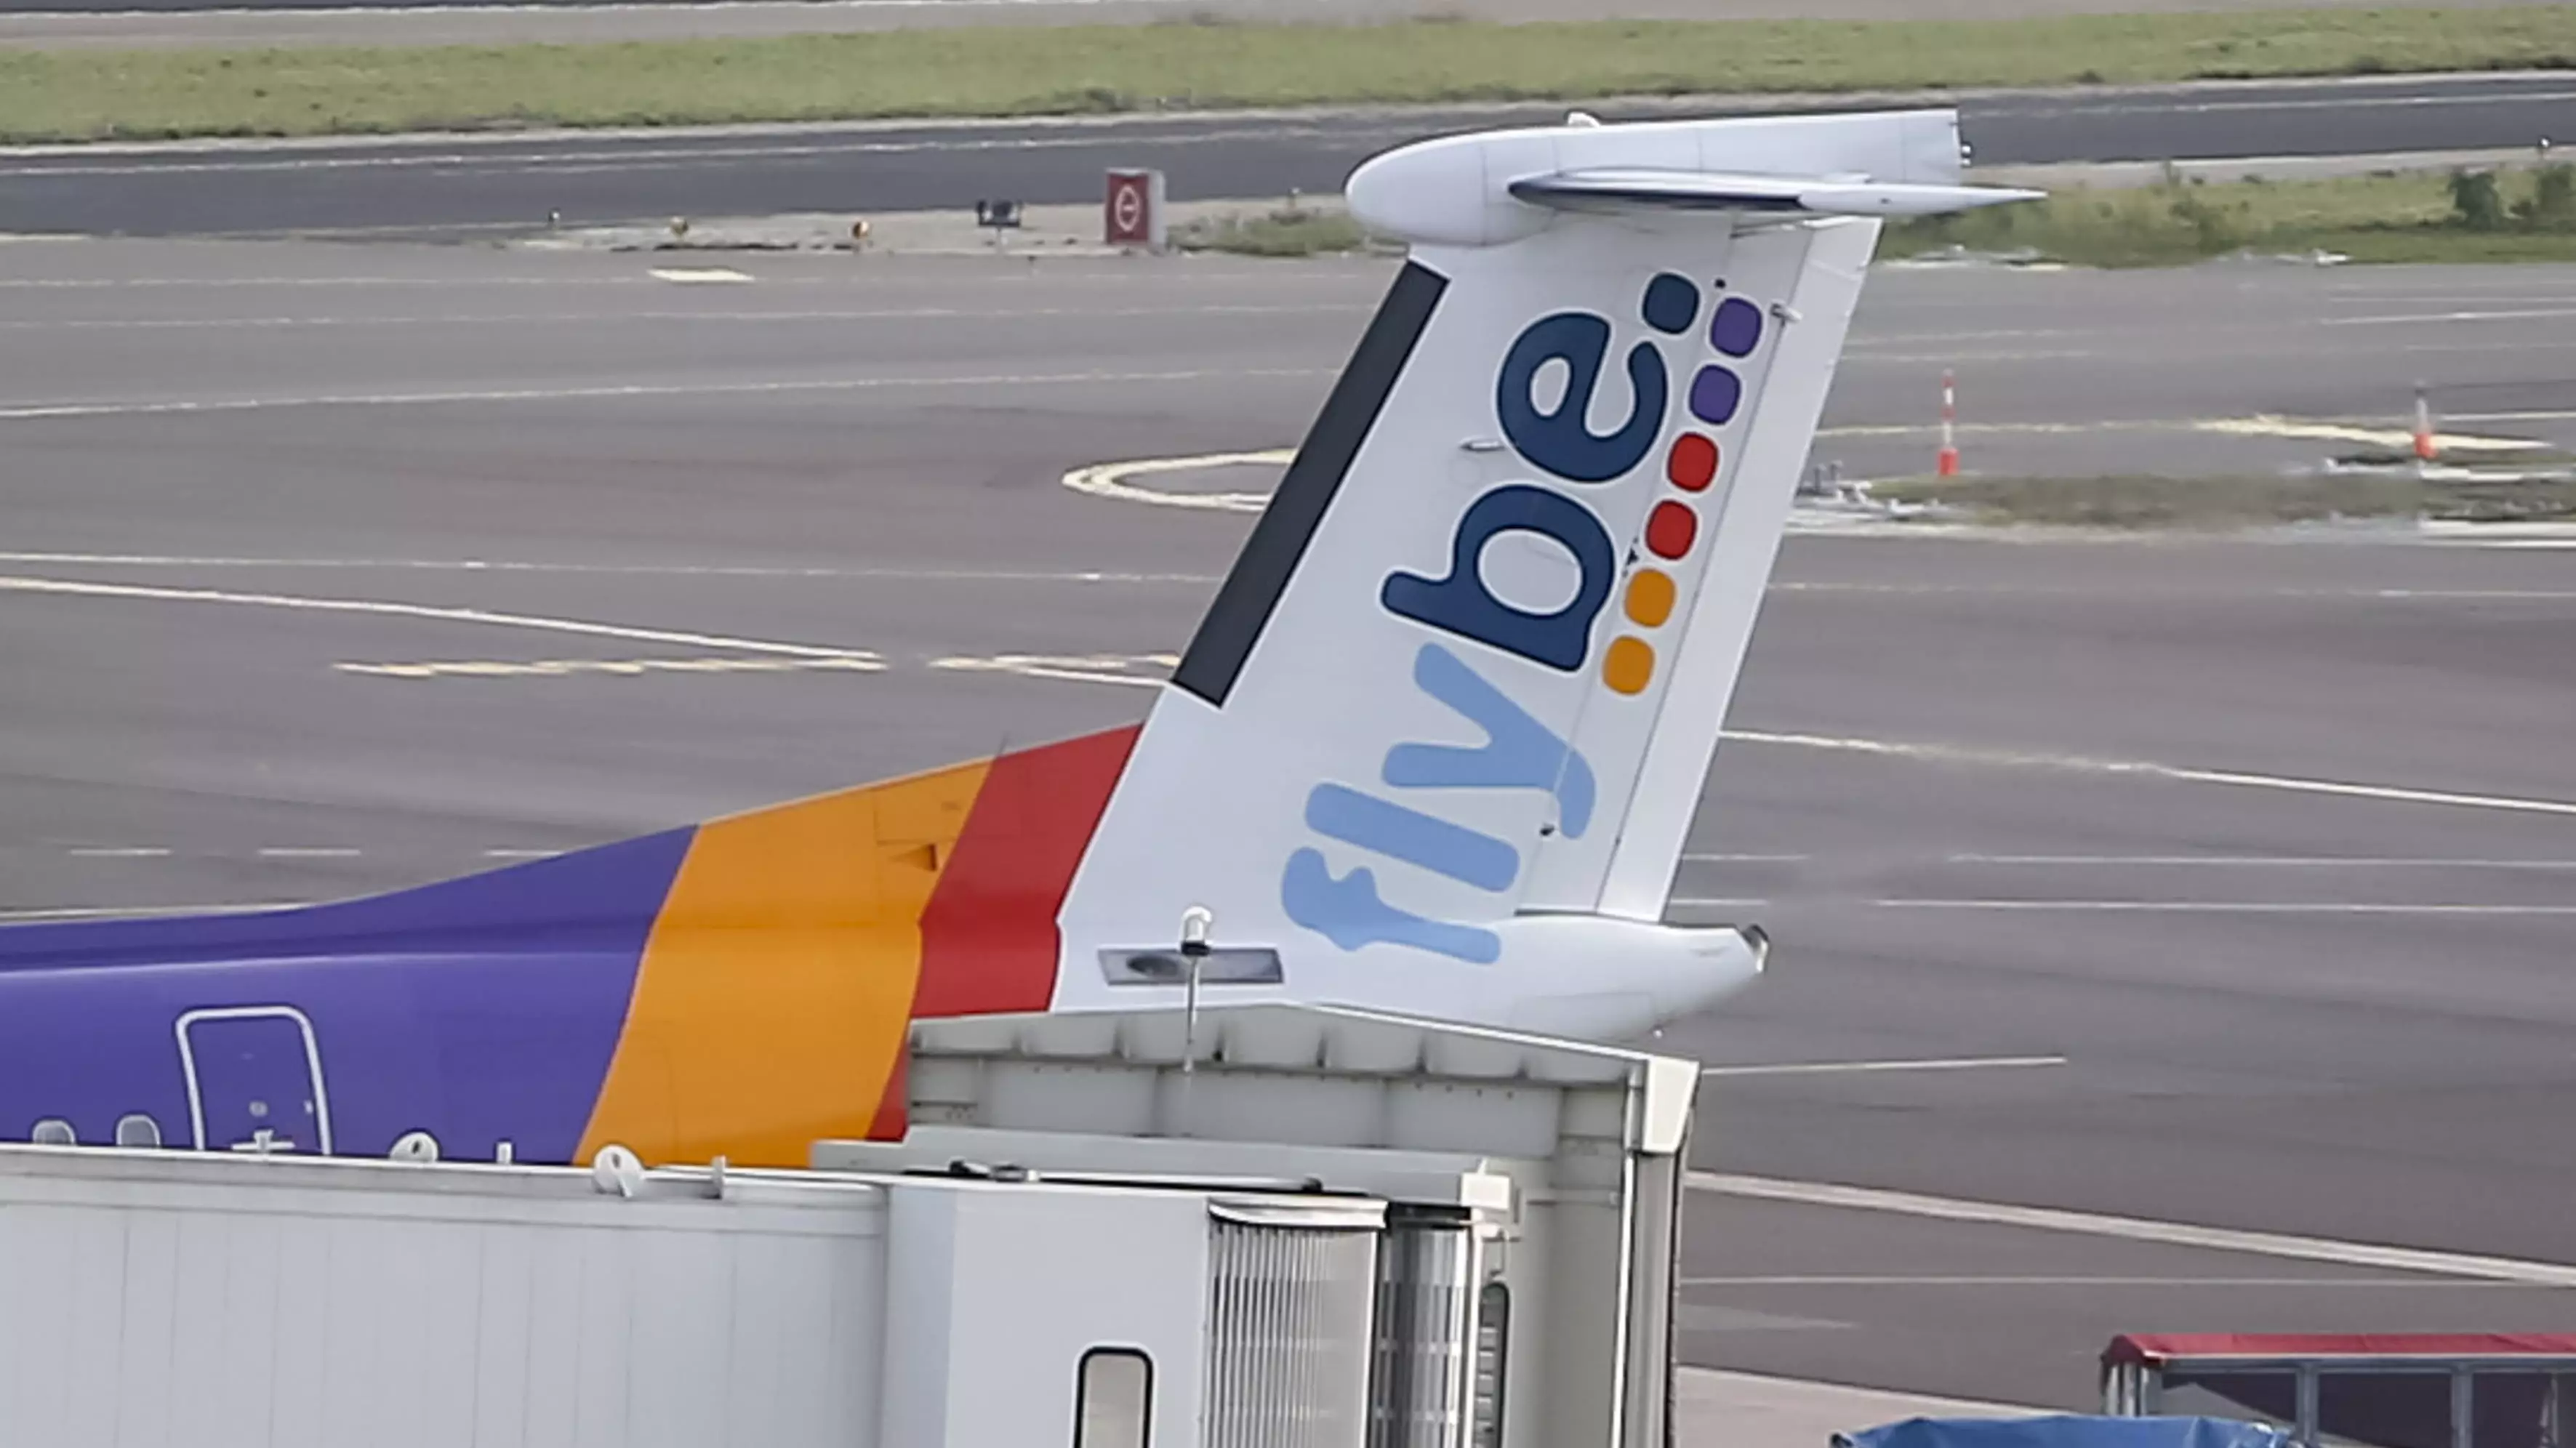 British Airline Flybe Has Gone Into Administration